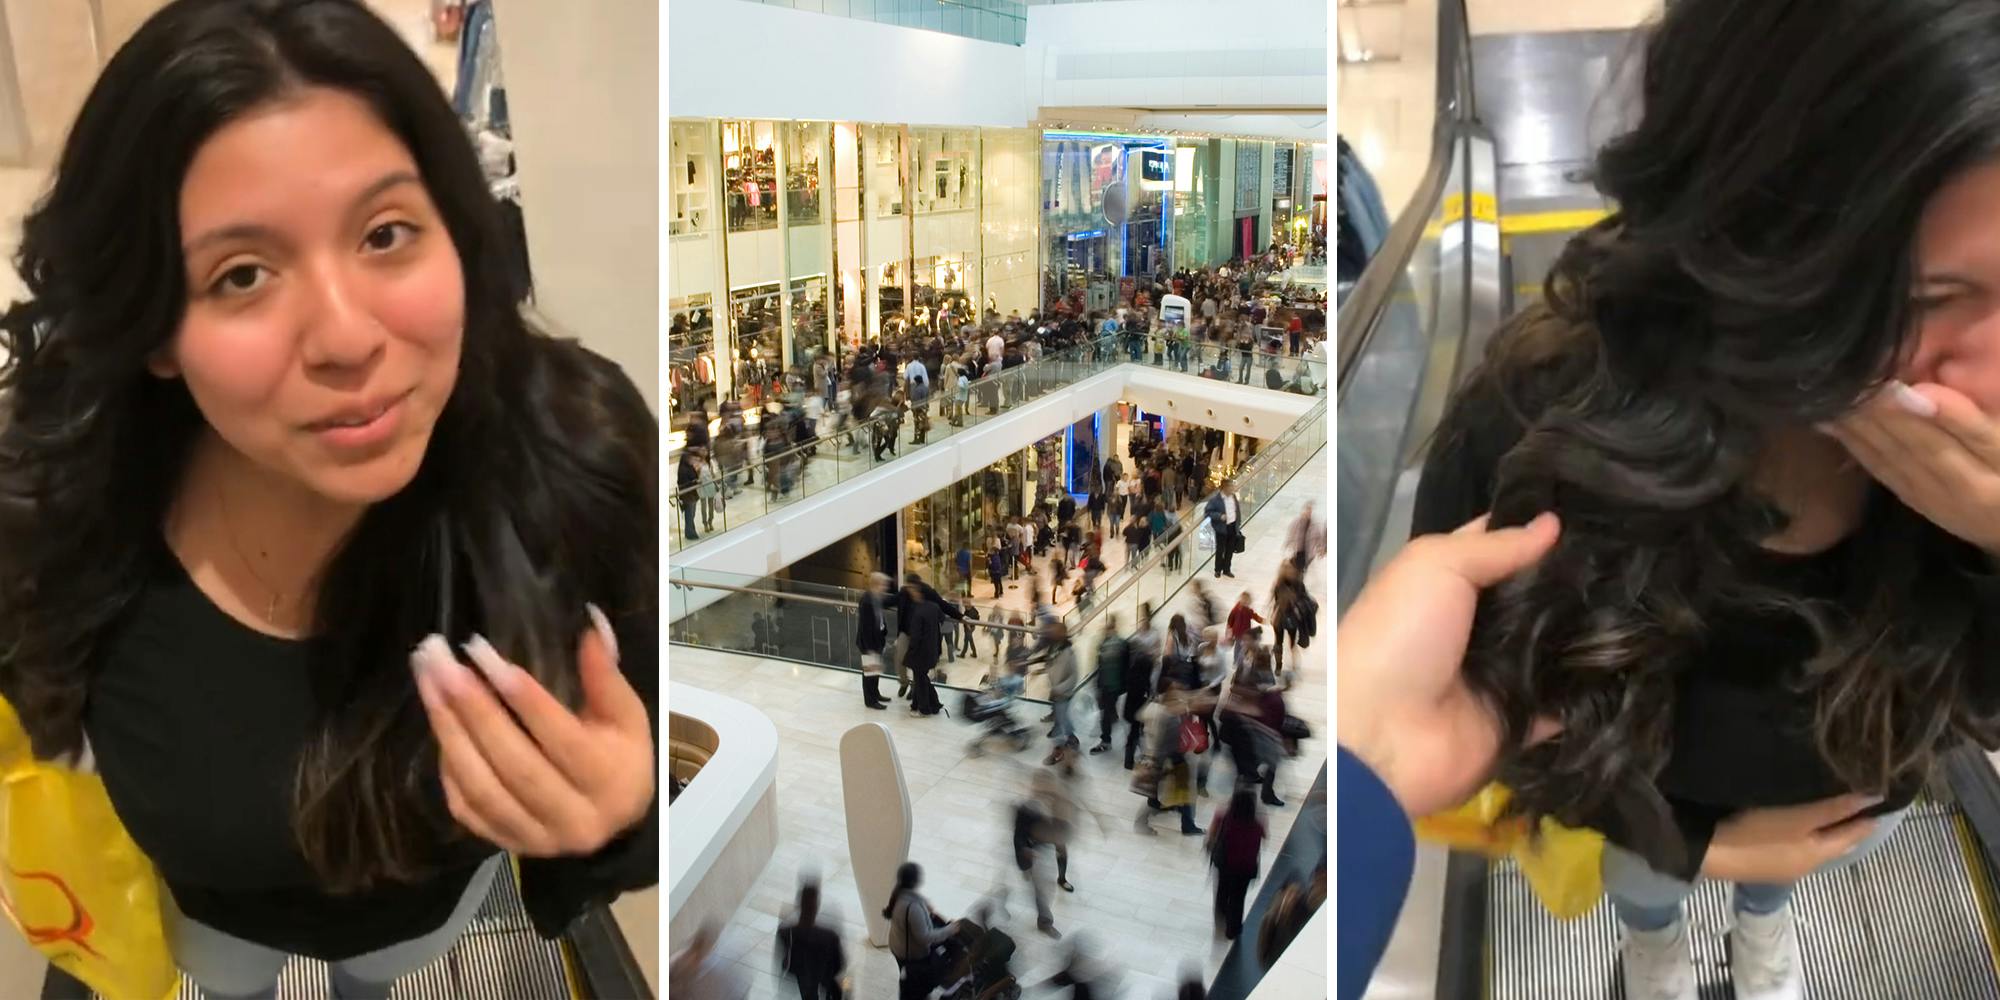 ‘This why ignore em n keep walking’: Mall shopper stops at beauty kiosk to test curling iron. It backfires